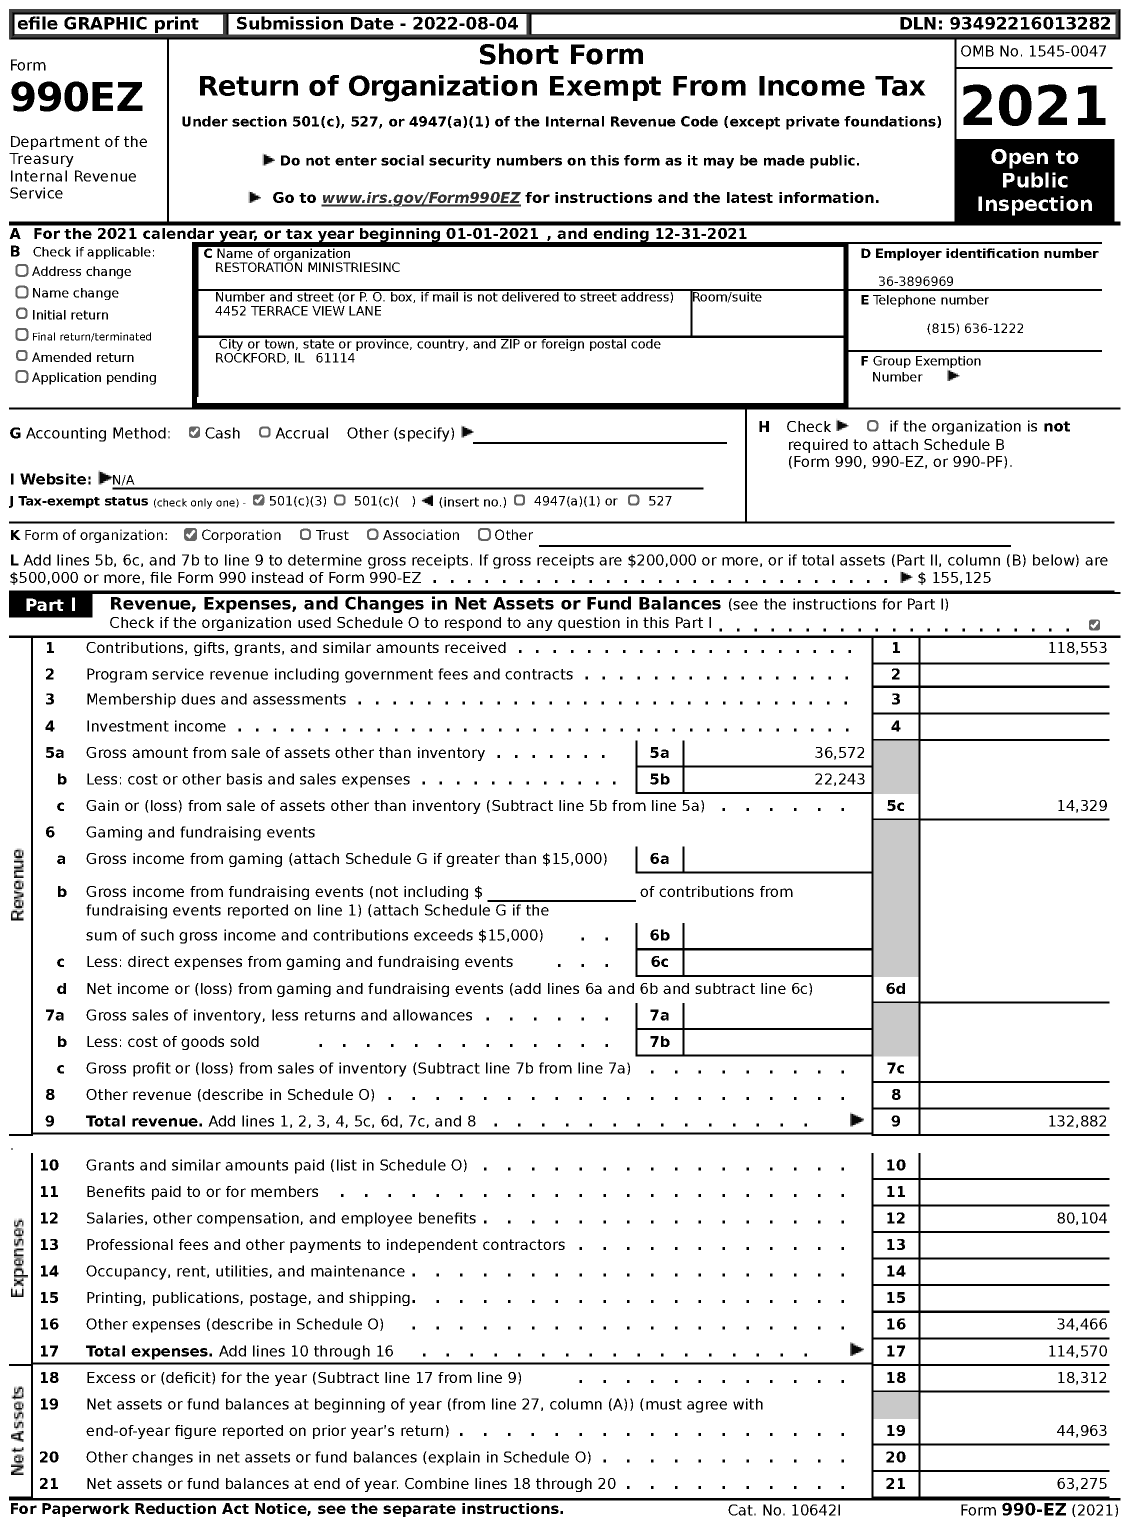 Image of first page of 2021 Form 990EZ for Restoration Ministriesinc